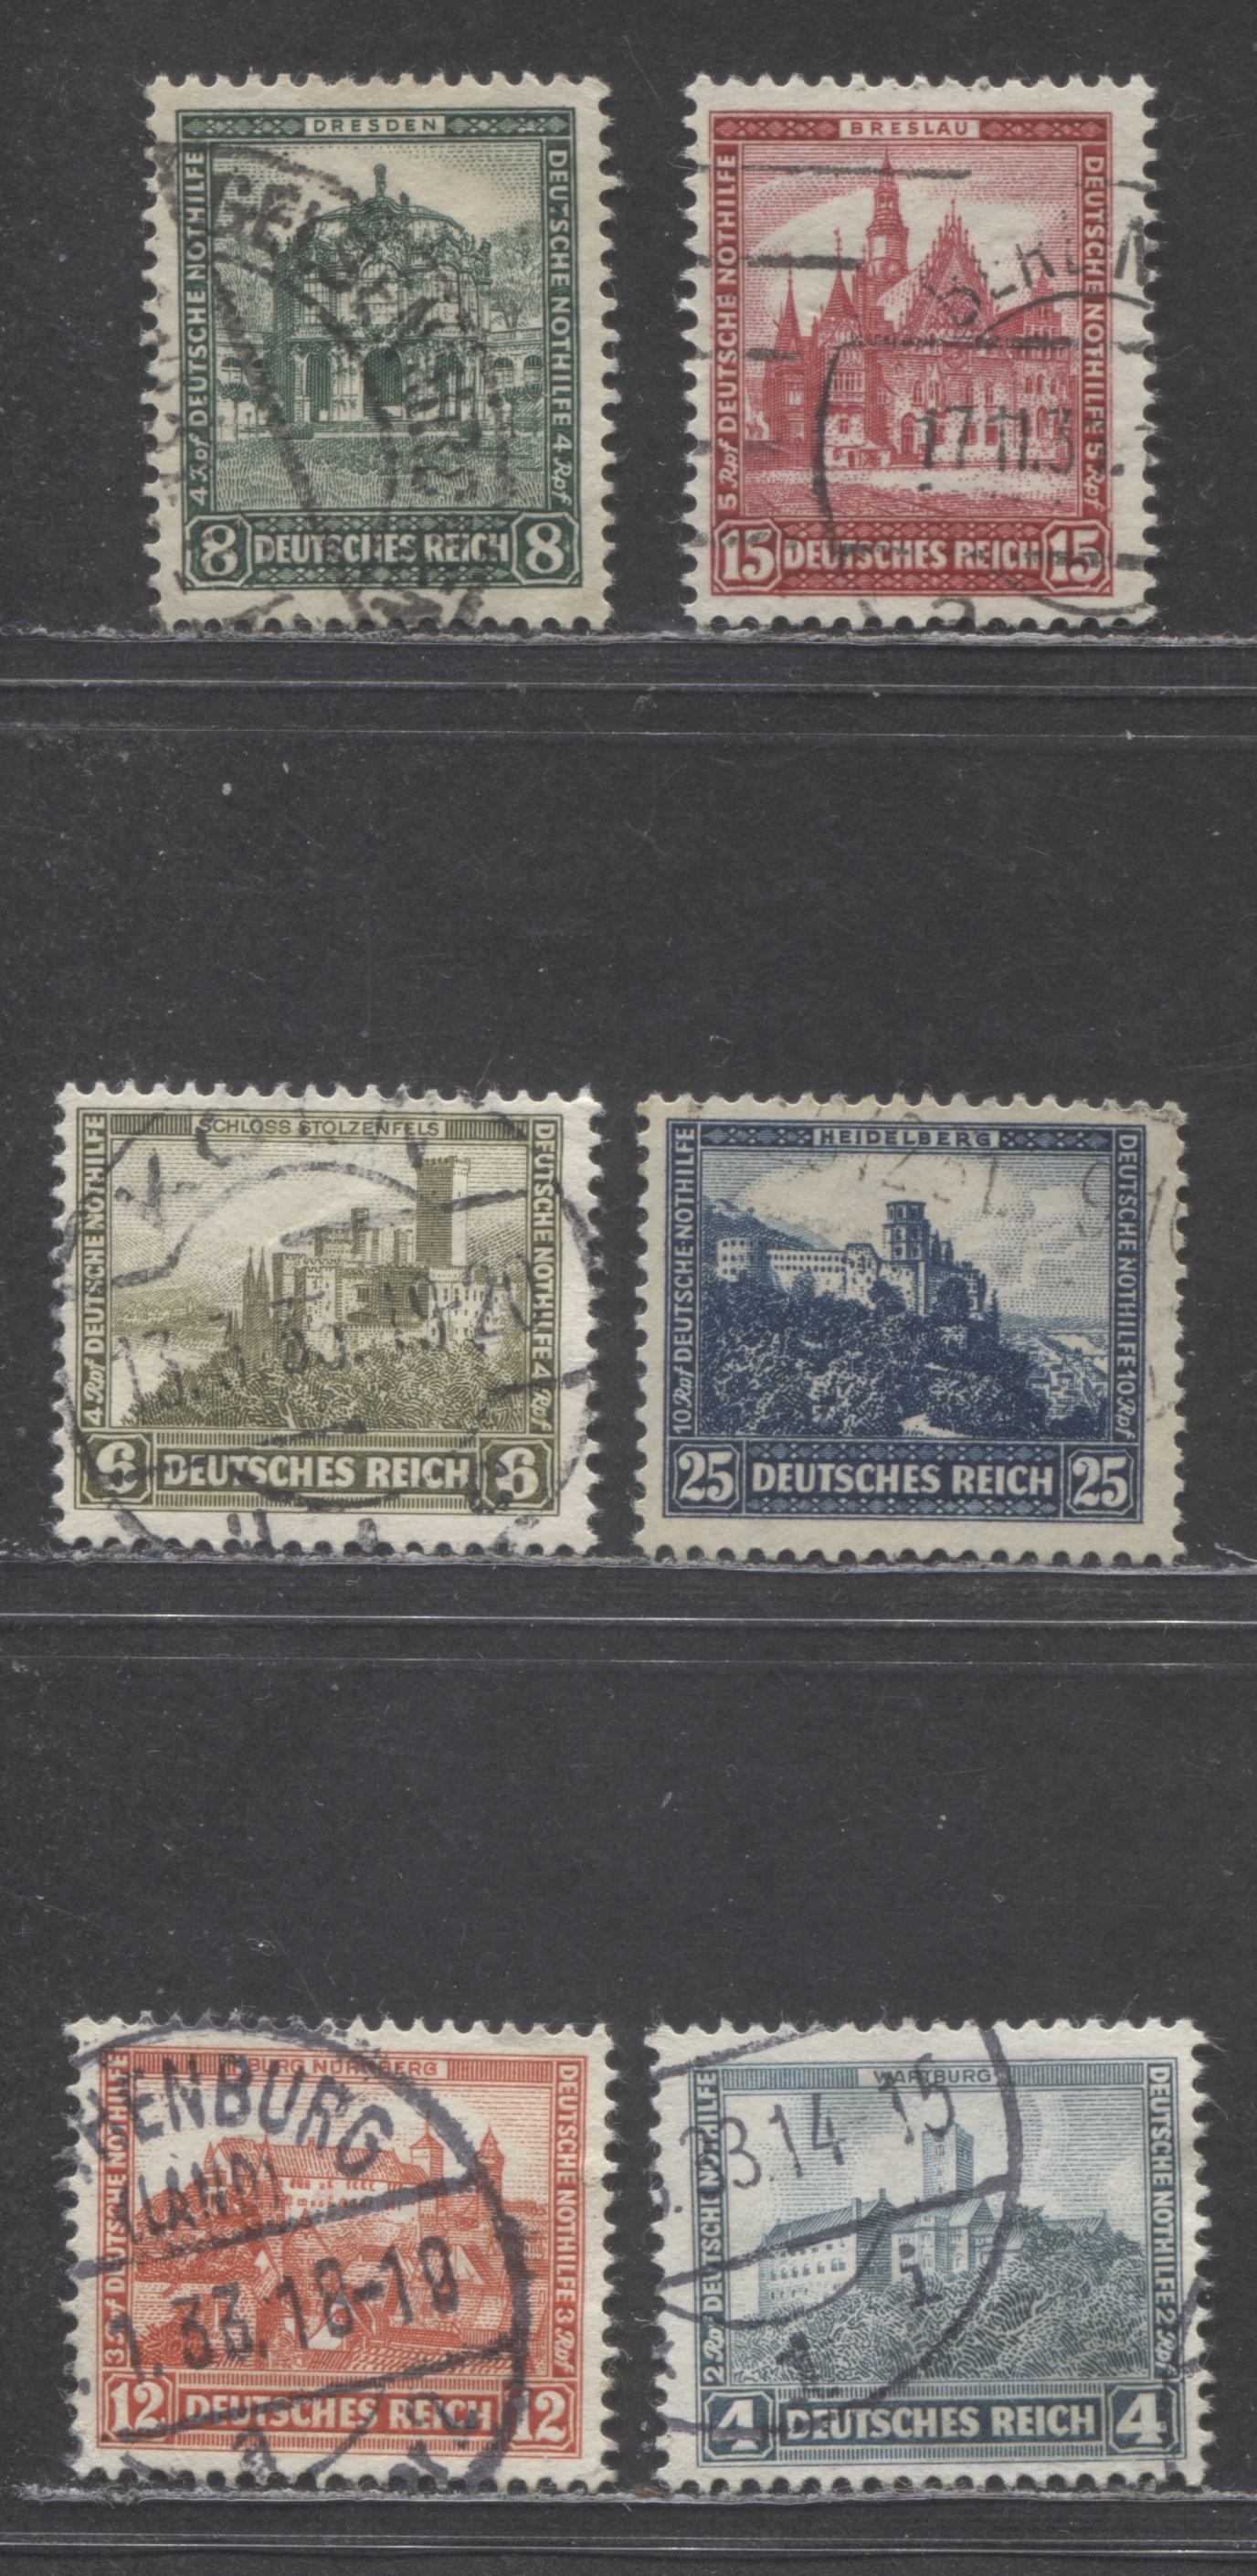 Lot 91 Germany SC#B38-B40, B44-B46(MI#459-461, 474-476) 1931-1932 Semi Postal Issue, 6 F/VF Postally Used Singles, Click on Listing to See ALL Pictures, Estimated Value $30 USD